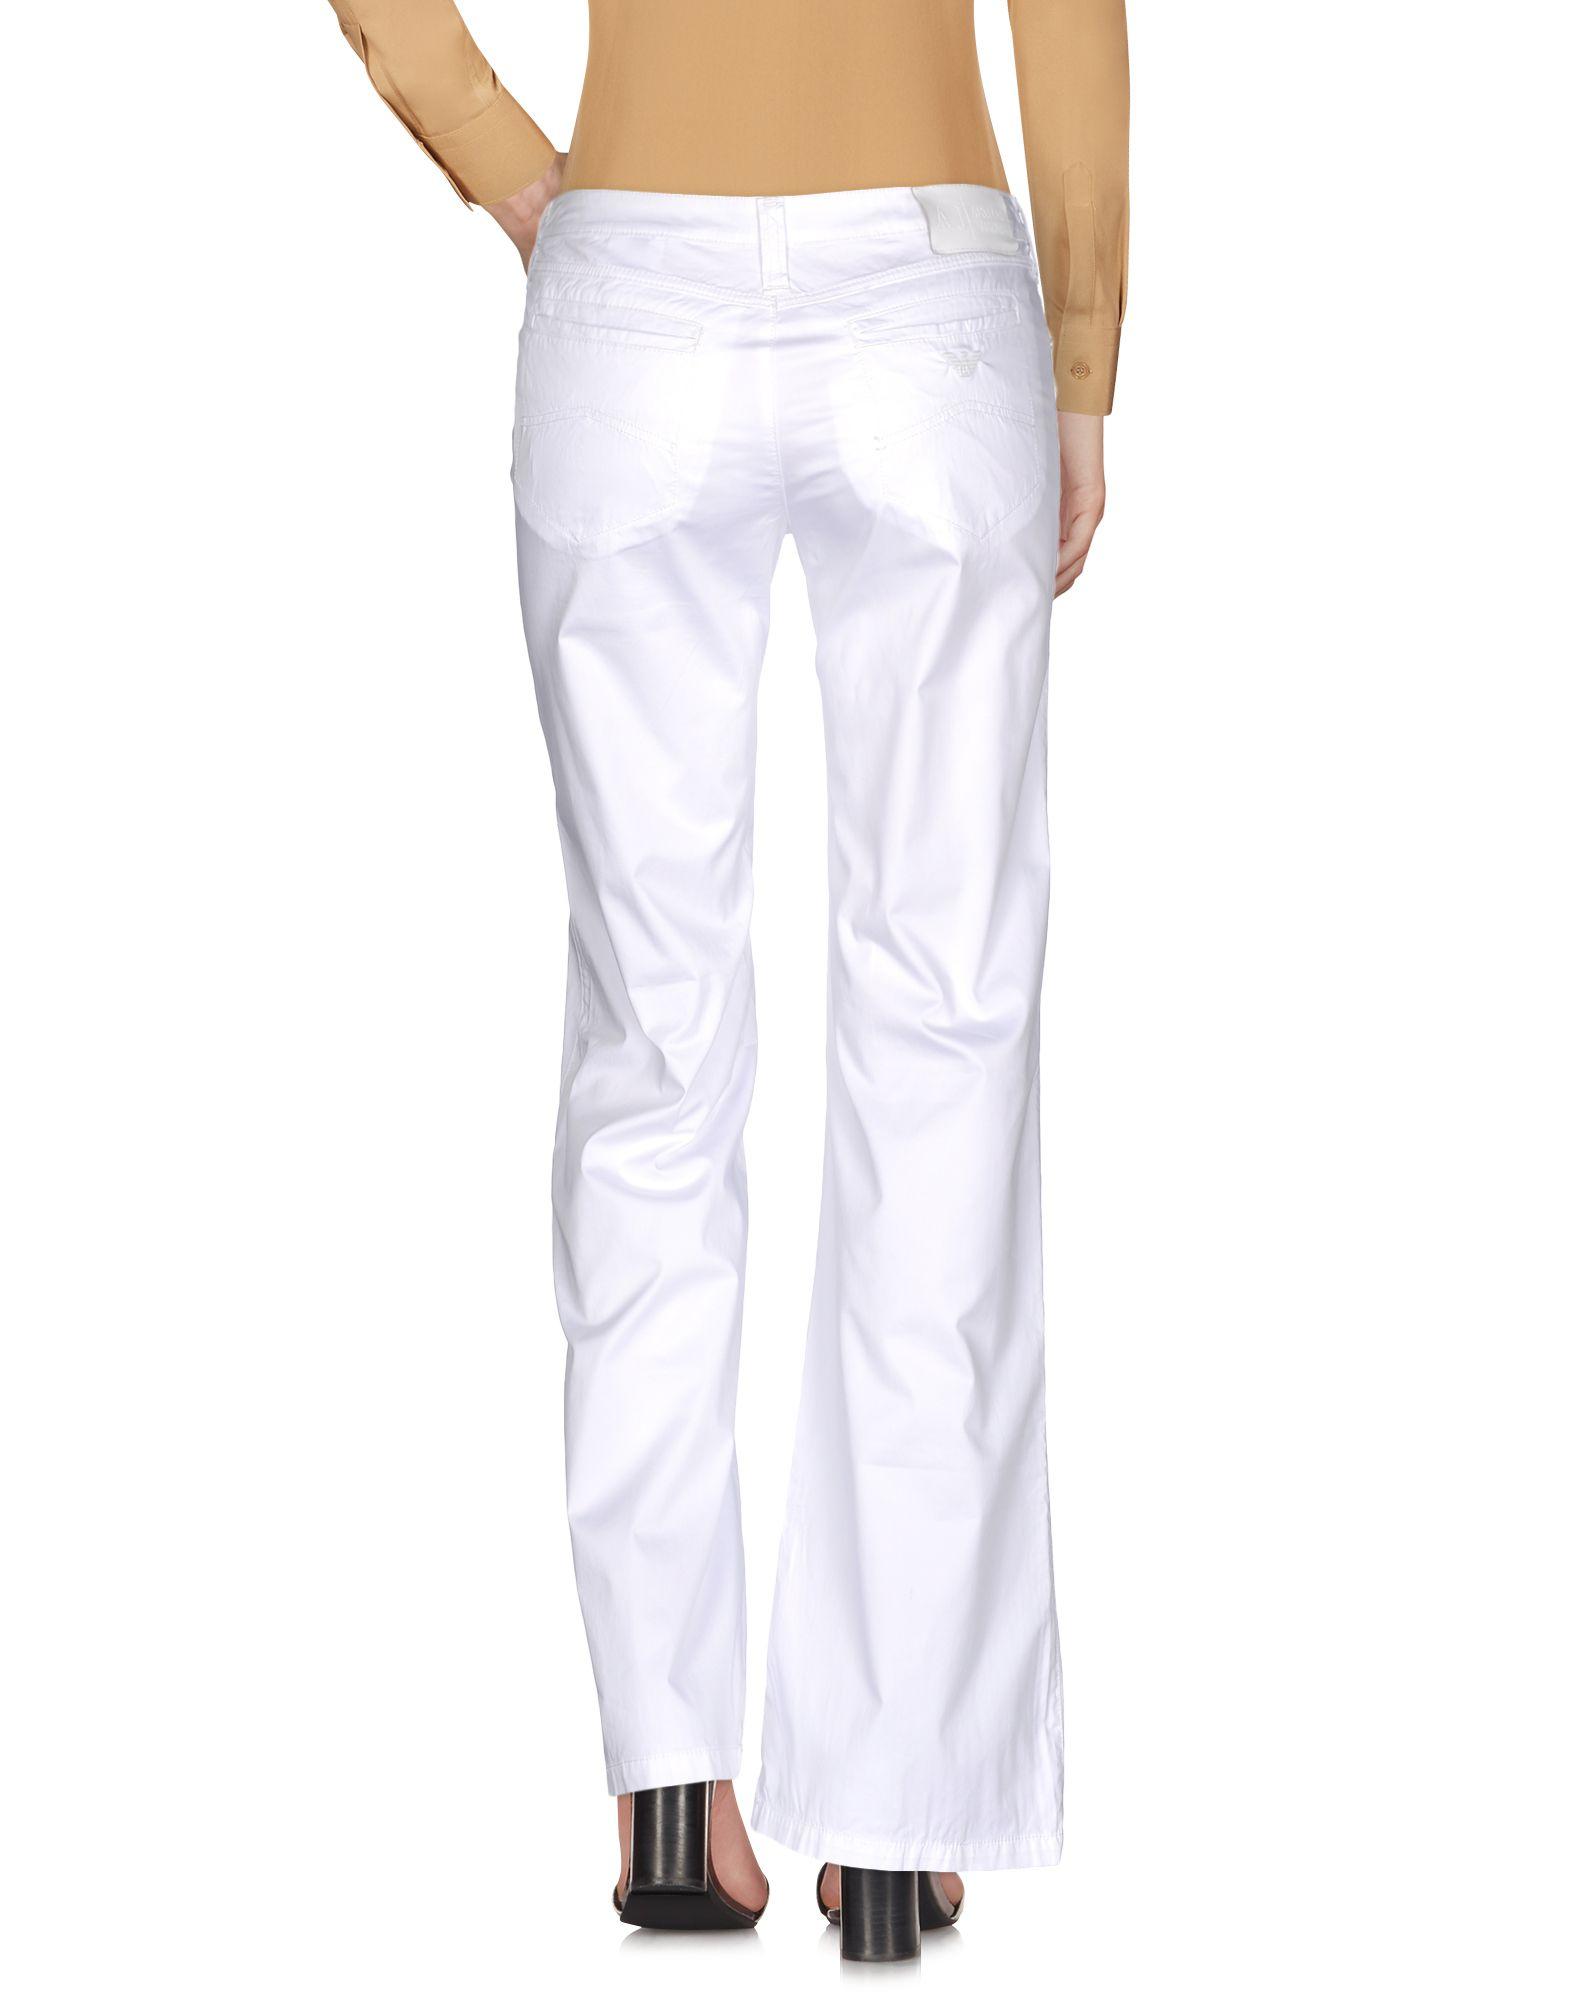 Armani Jeans Cotton Casual Pants in White - Lyst